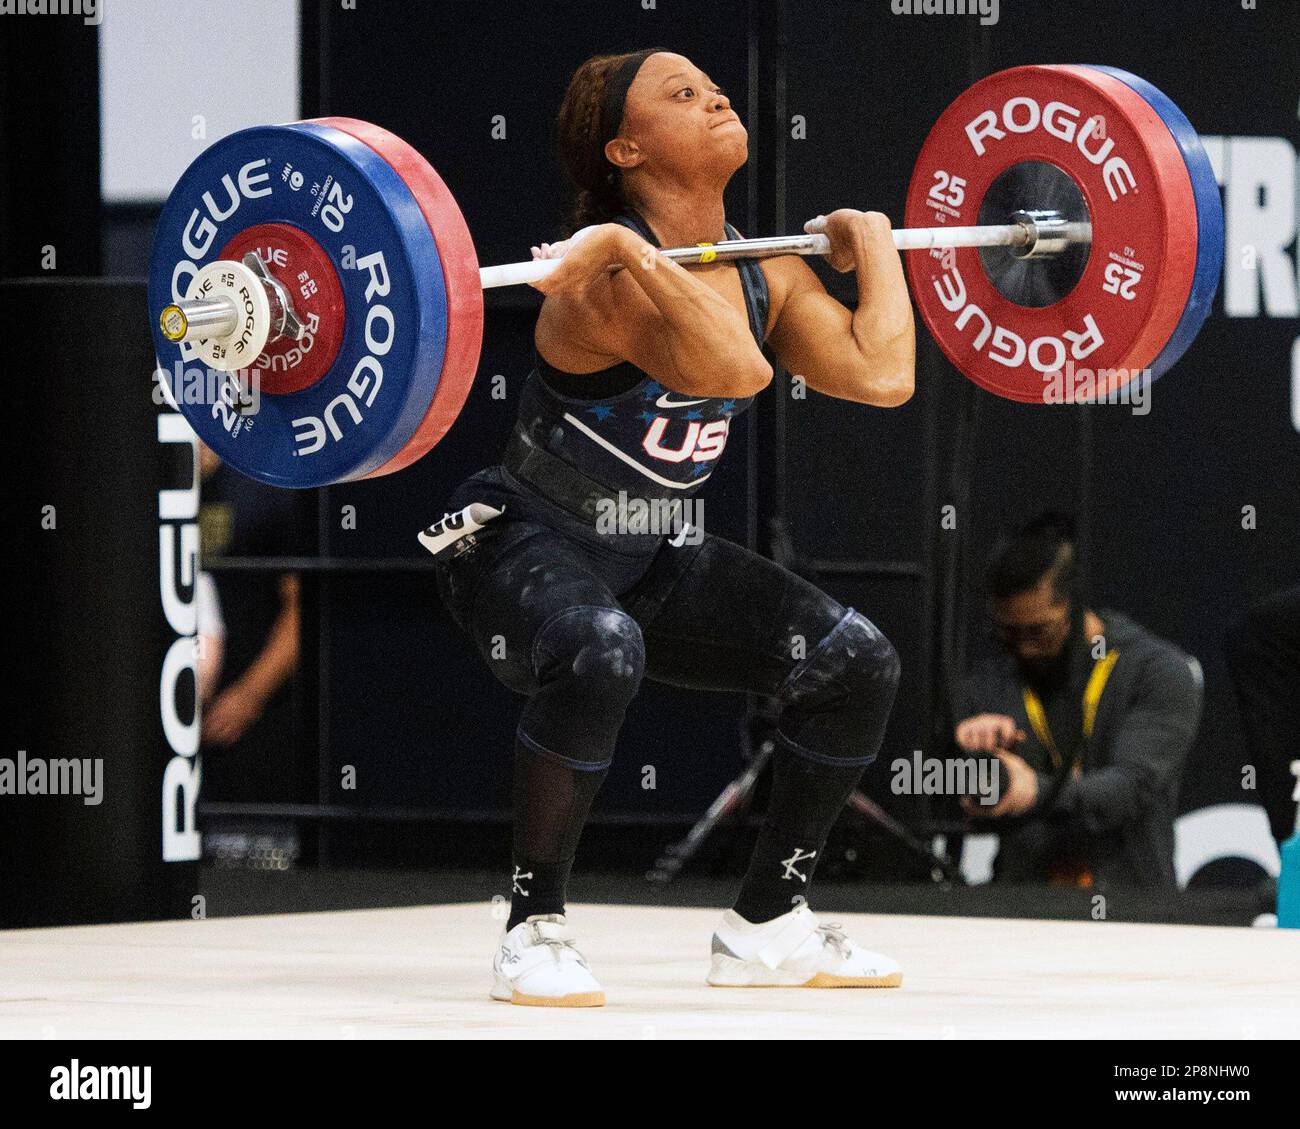 Columbus, Ohio, United States. 3th Mar, 2023. Shayla Moore lifts 116kgs in the clean and jerk in the Women's 59kg category at the Rogue Stage in Columbus, Ohio, USA. Credit: Brent Clark/Alamy Live News Stock Photo